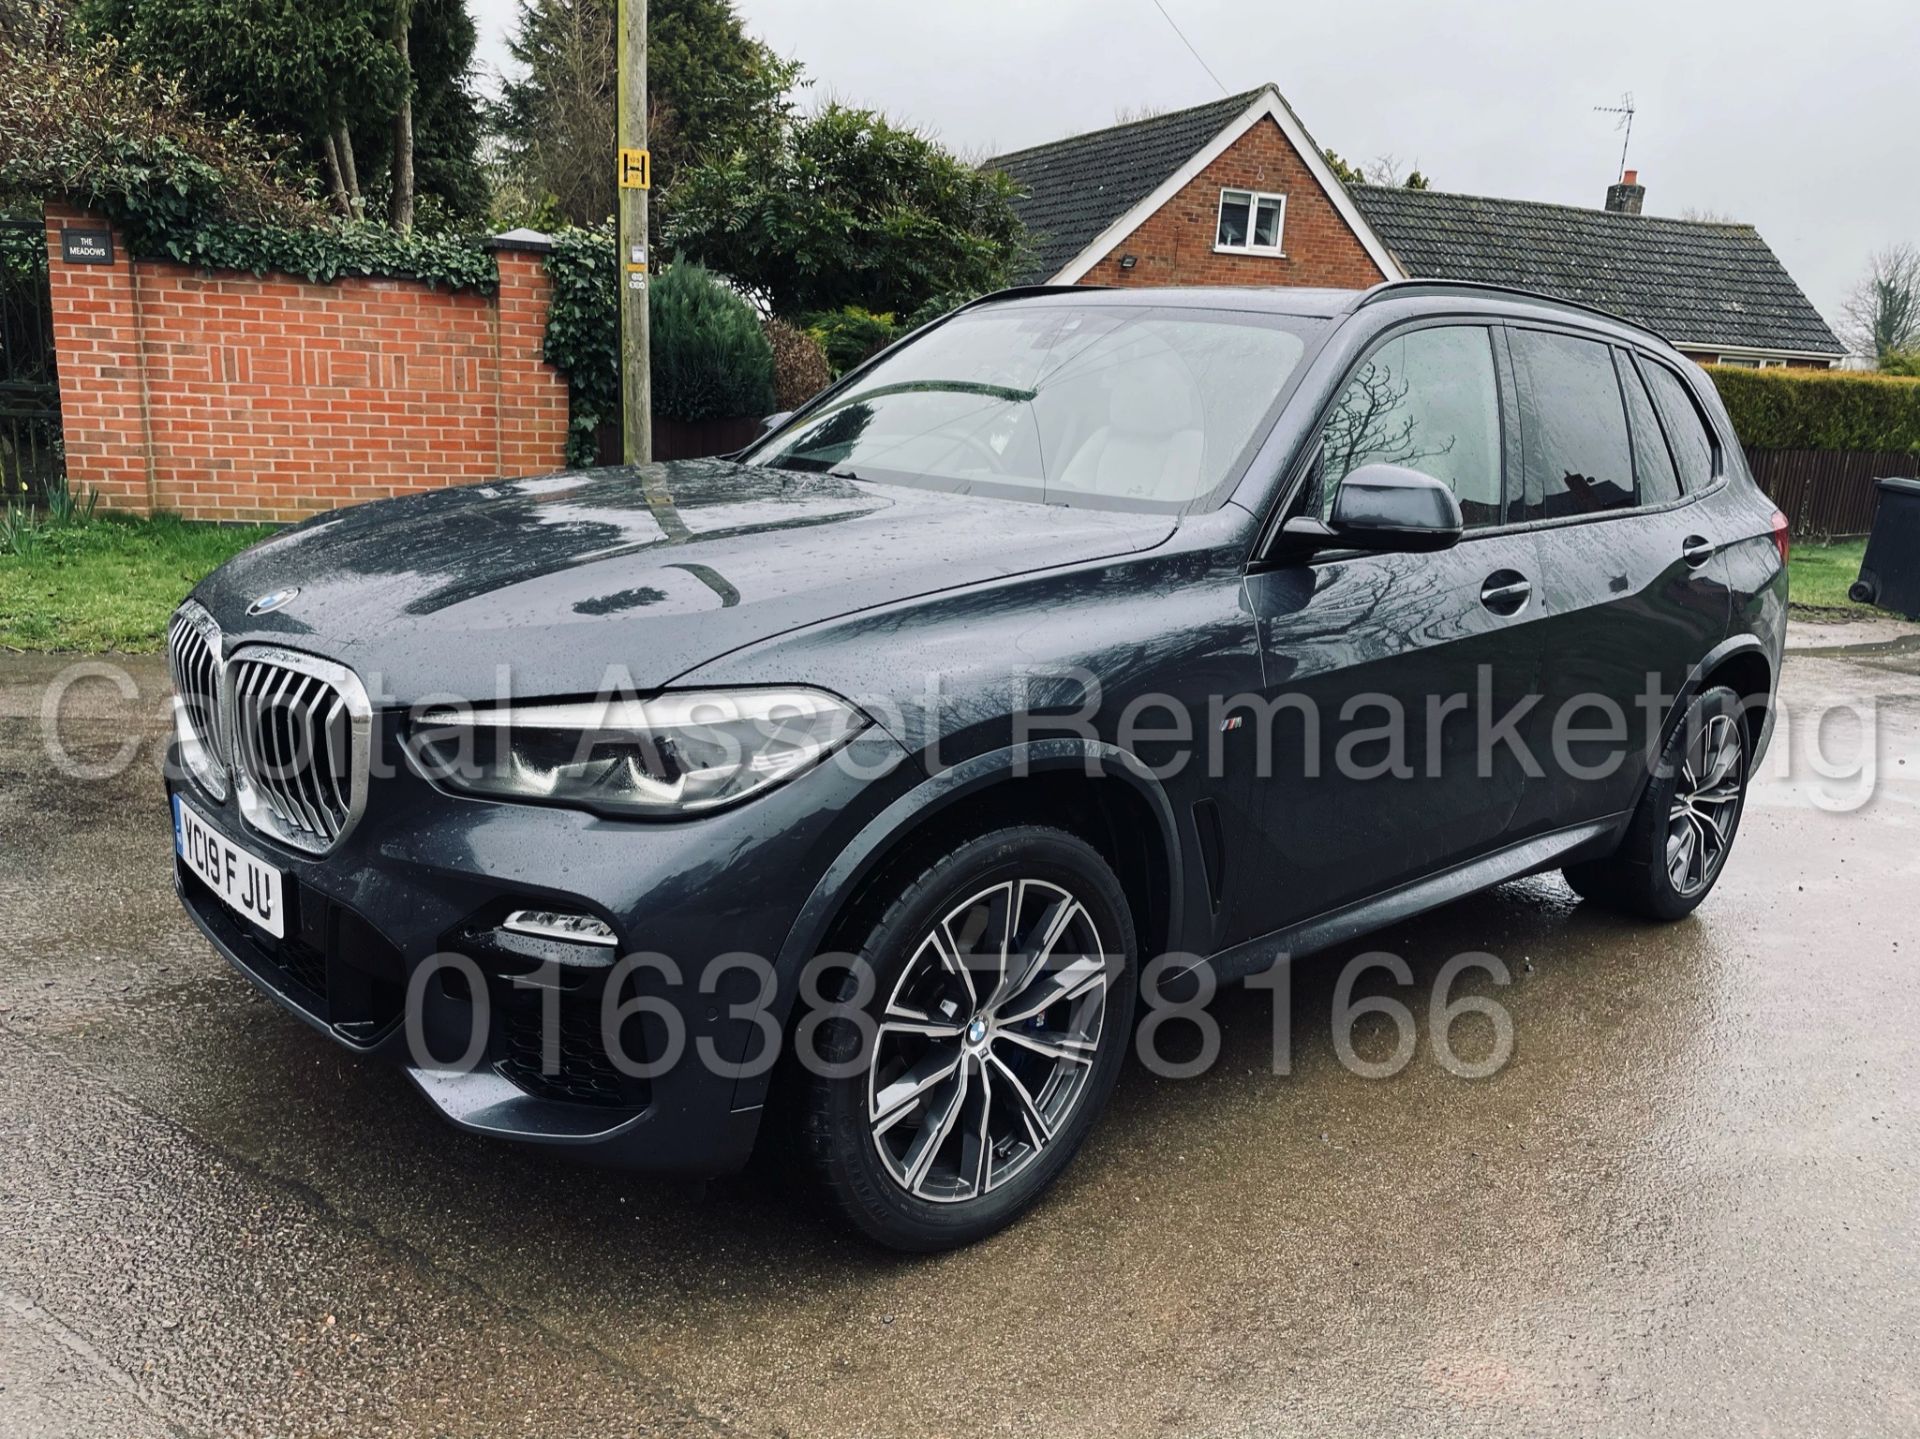 (On Sale) BMW X5 *M SPORT* X-DRIVE *7 SEATER SUV* (2019 - EURO 6) '3.0 DIESEL - AUTO' *PAN ROOF* - Image 5 of 70